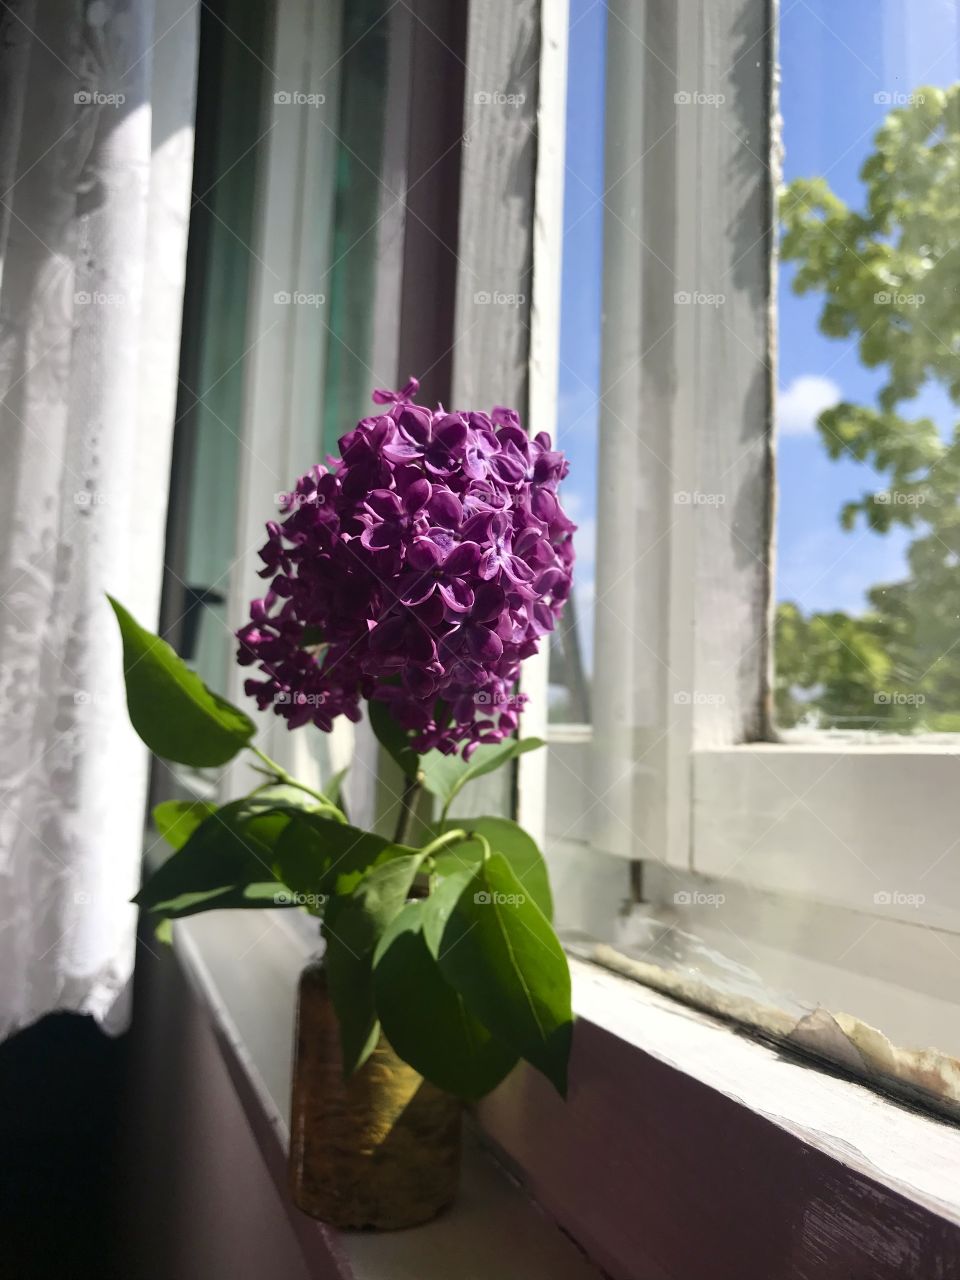 A window is more beautiful with lilac flowers.